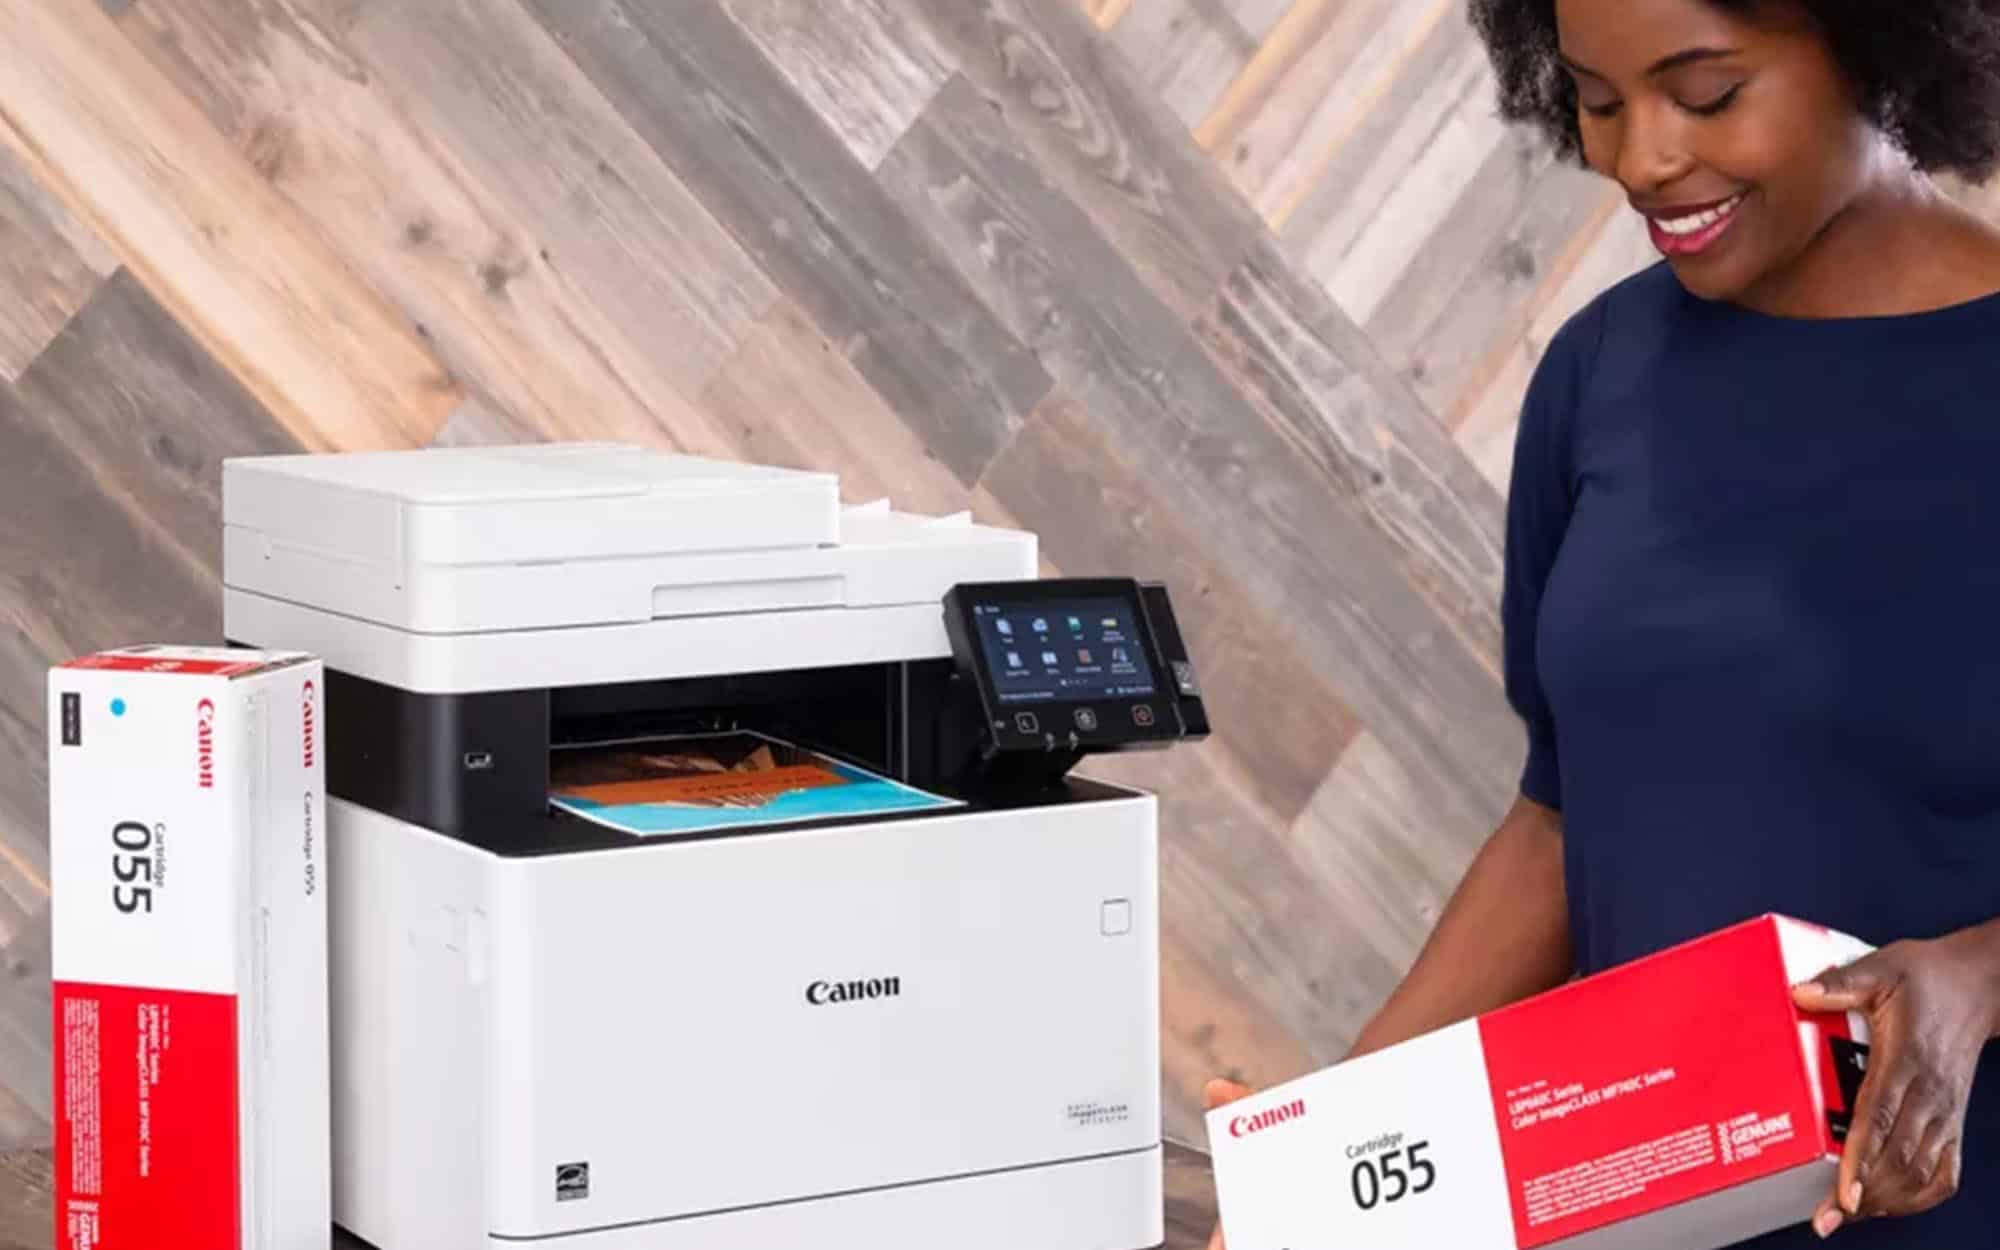 Side view of a woman using a canon printer